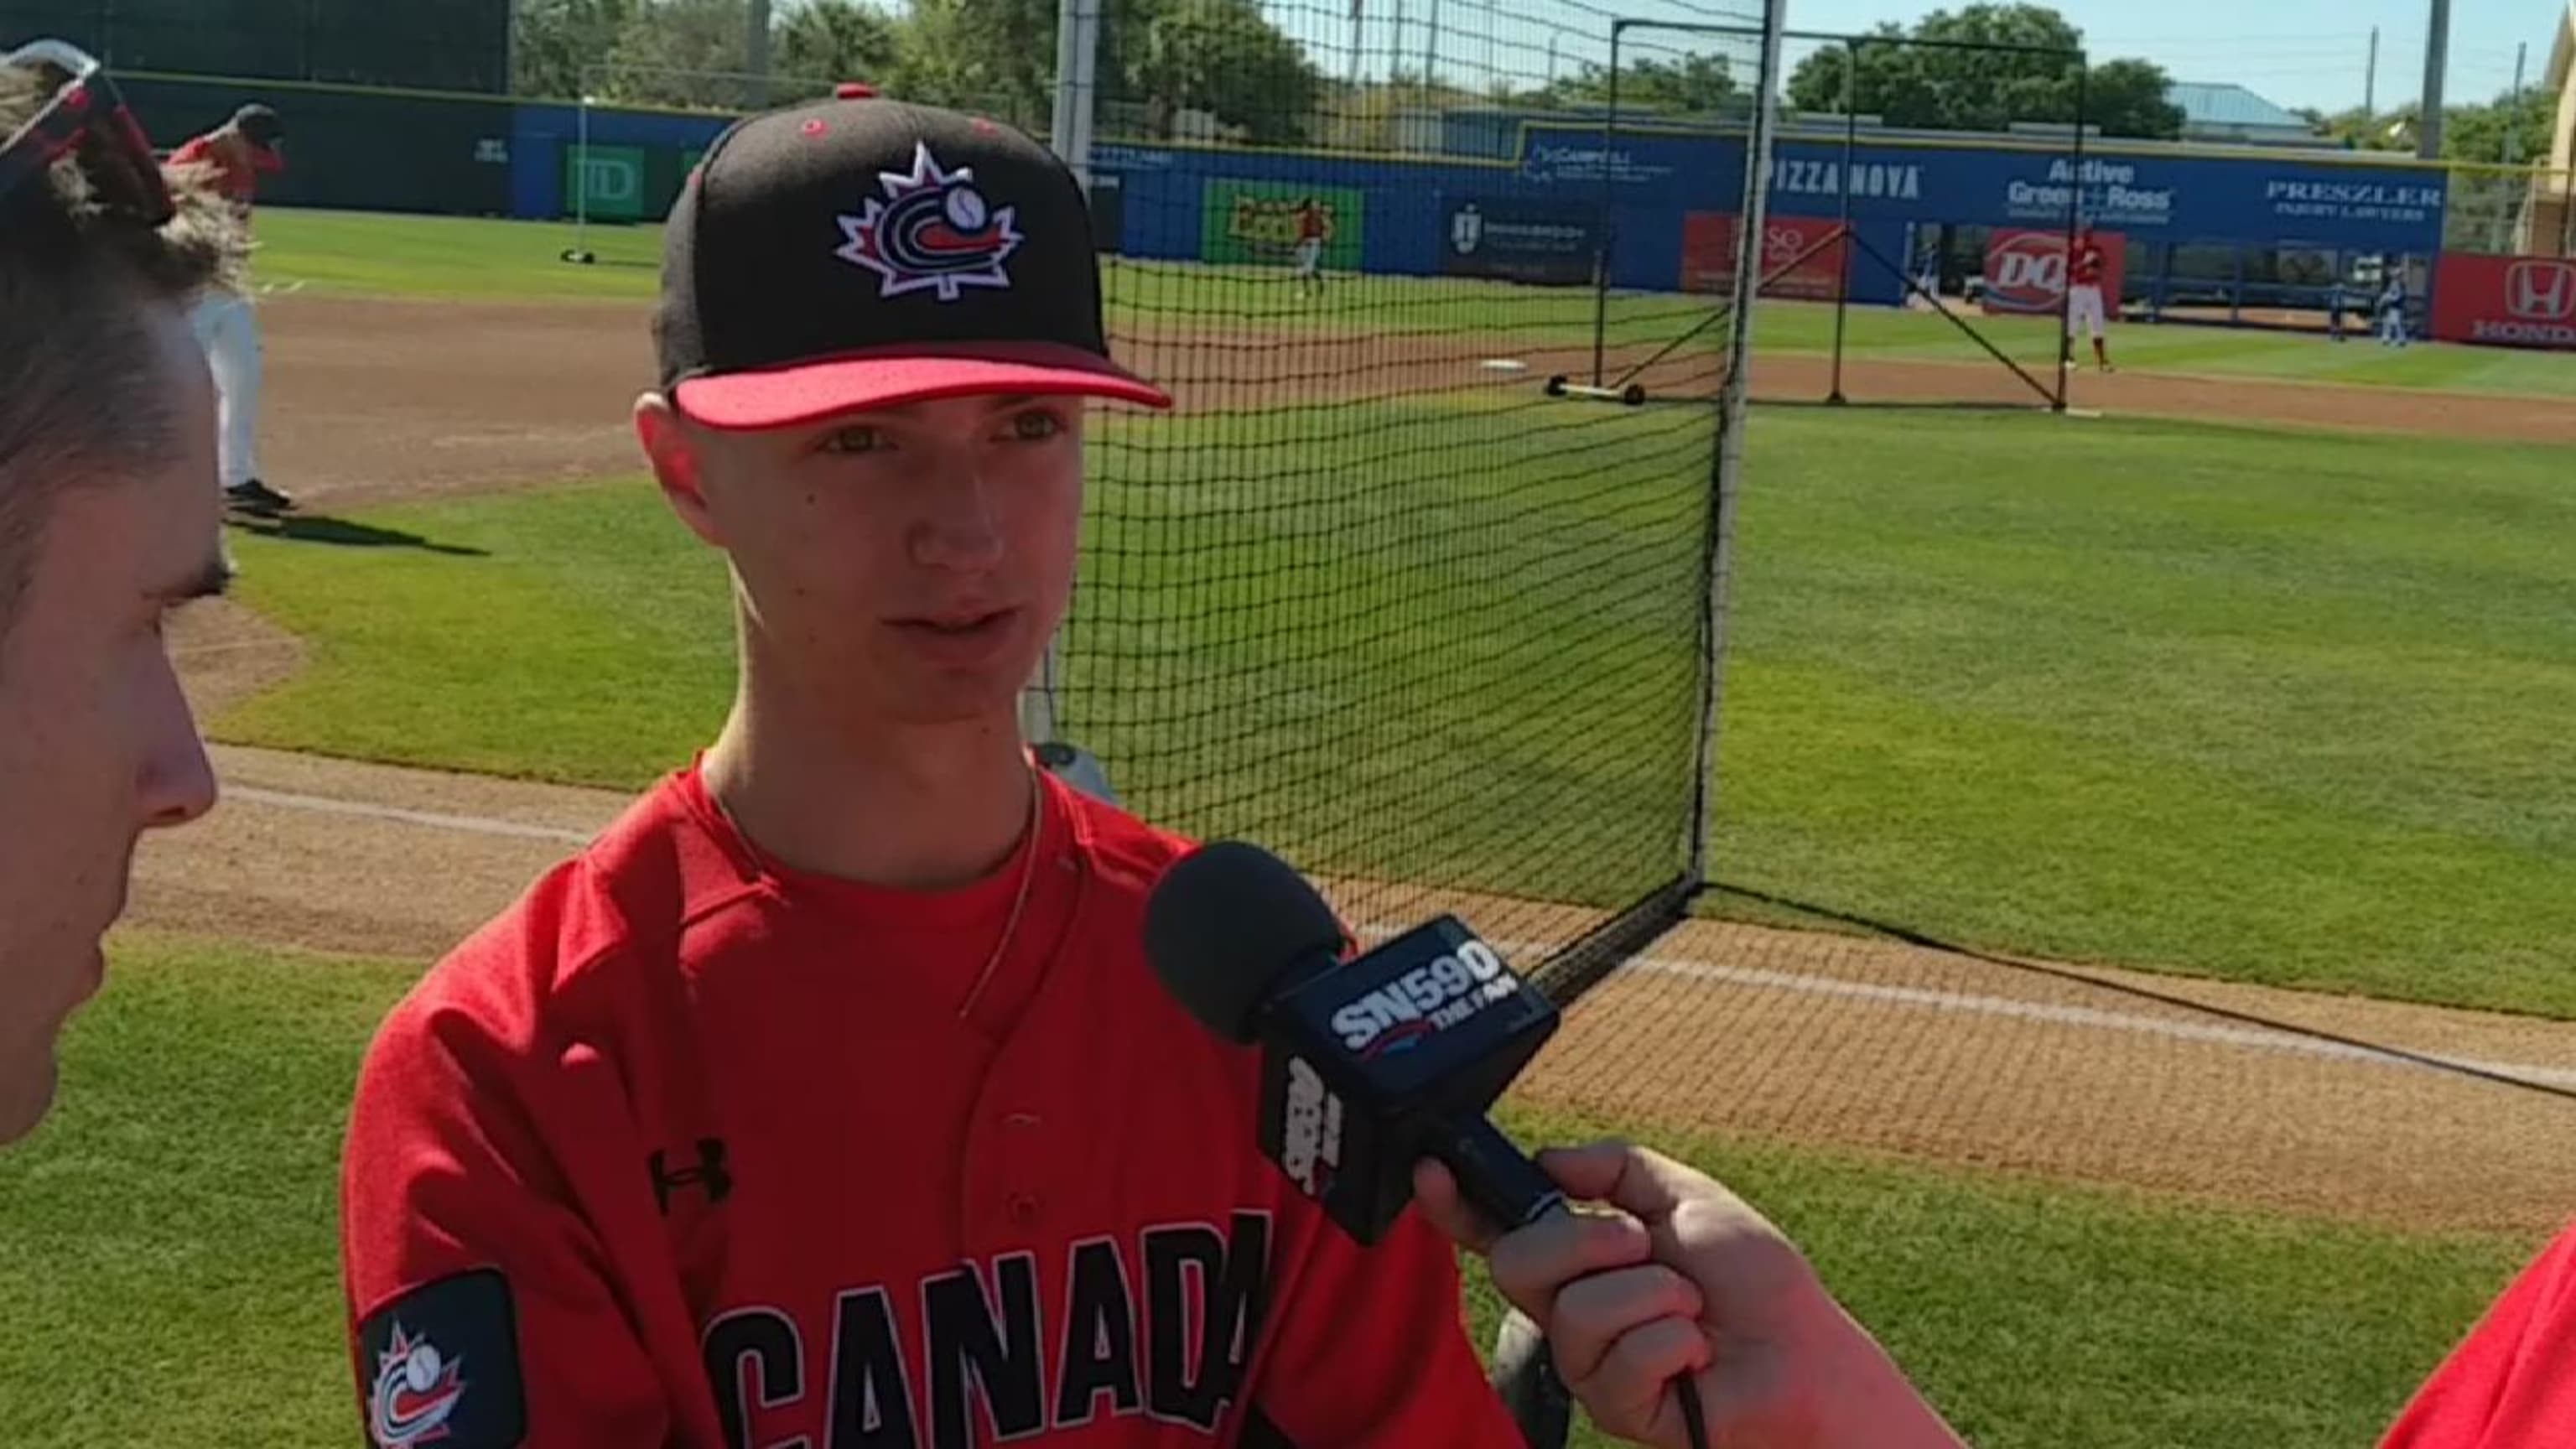 Roy Halladay's son pitches against Blue Jays